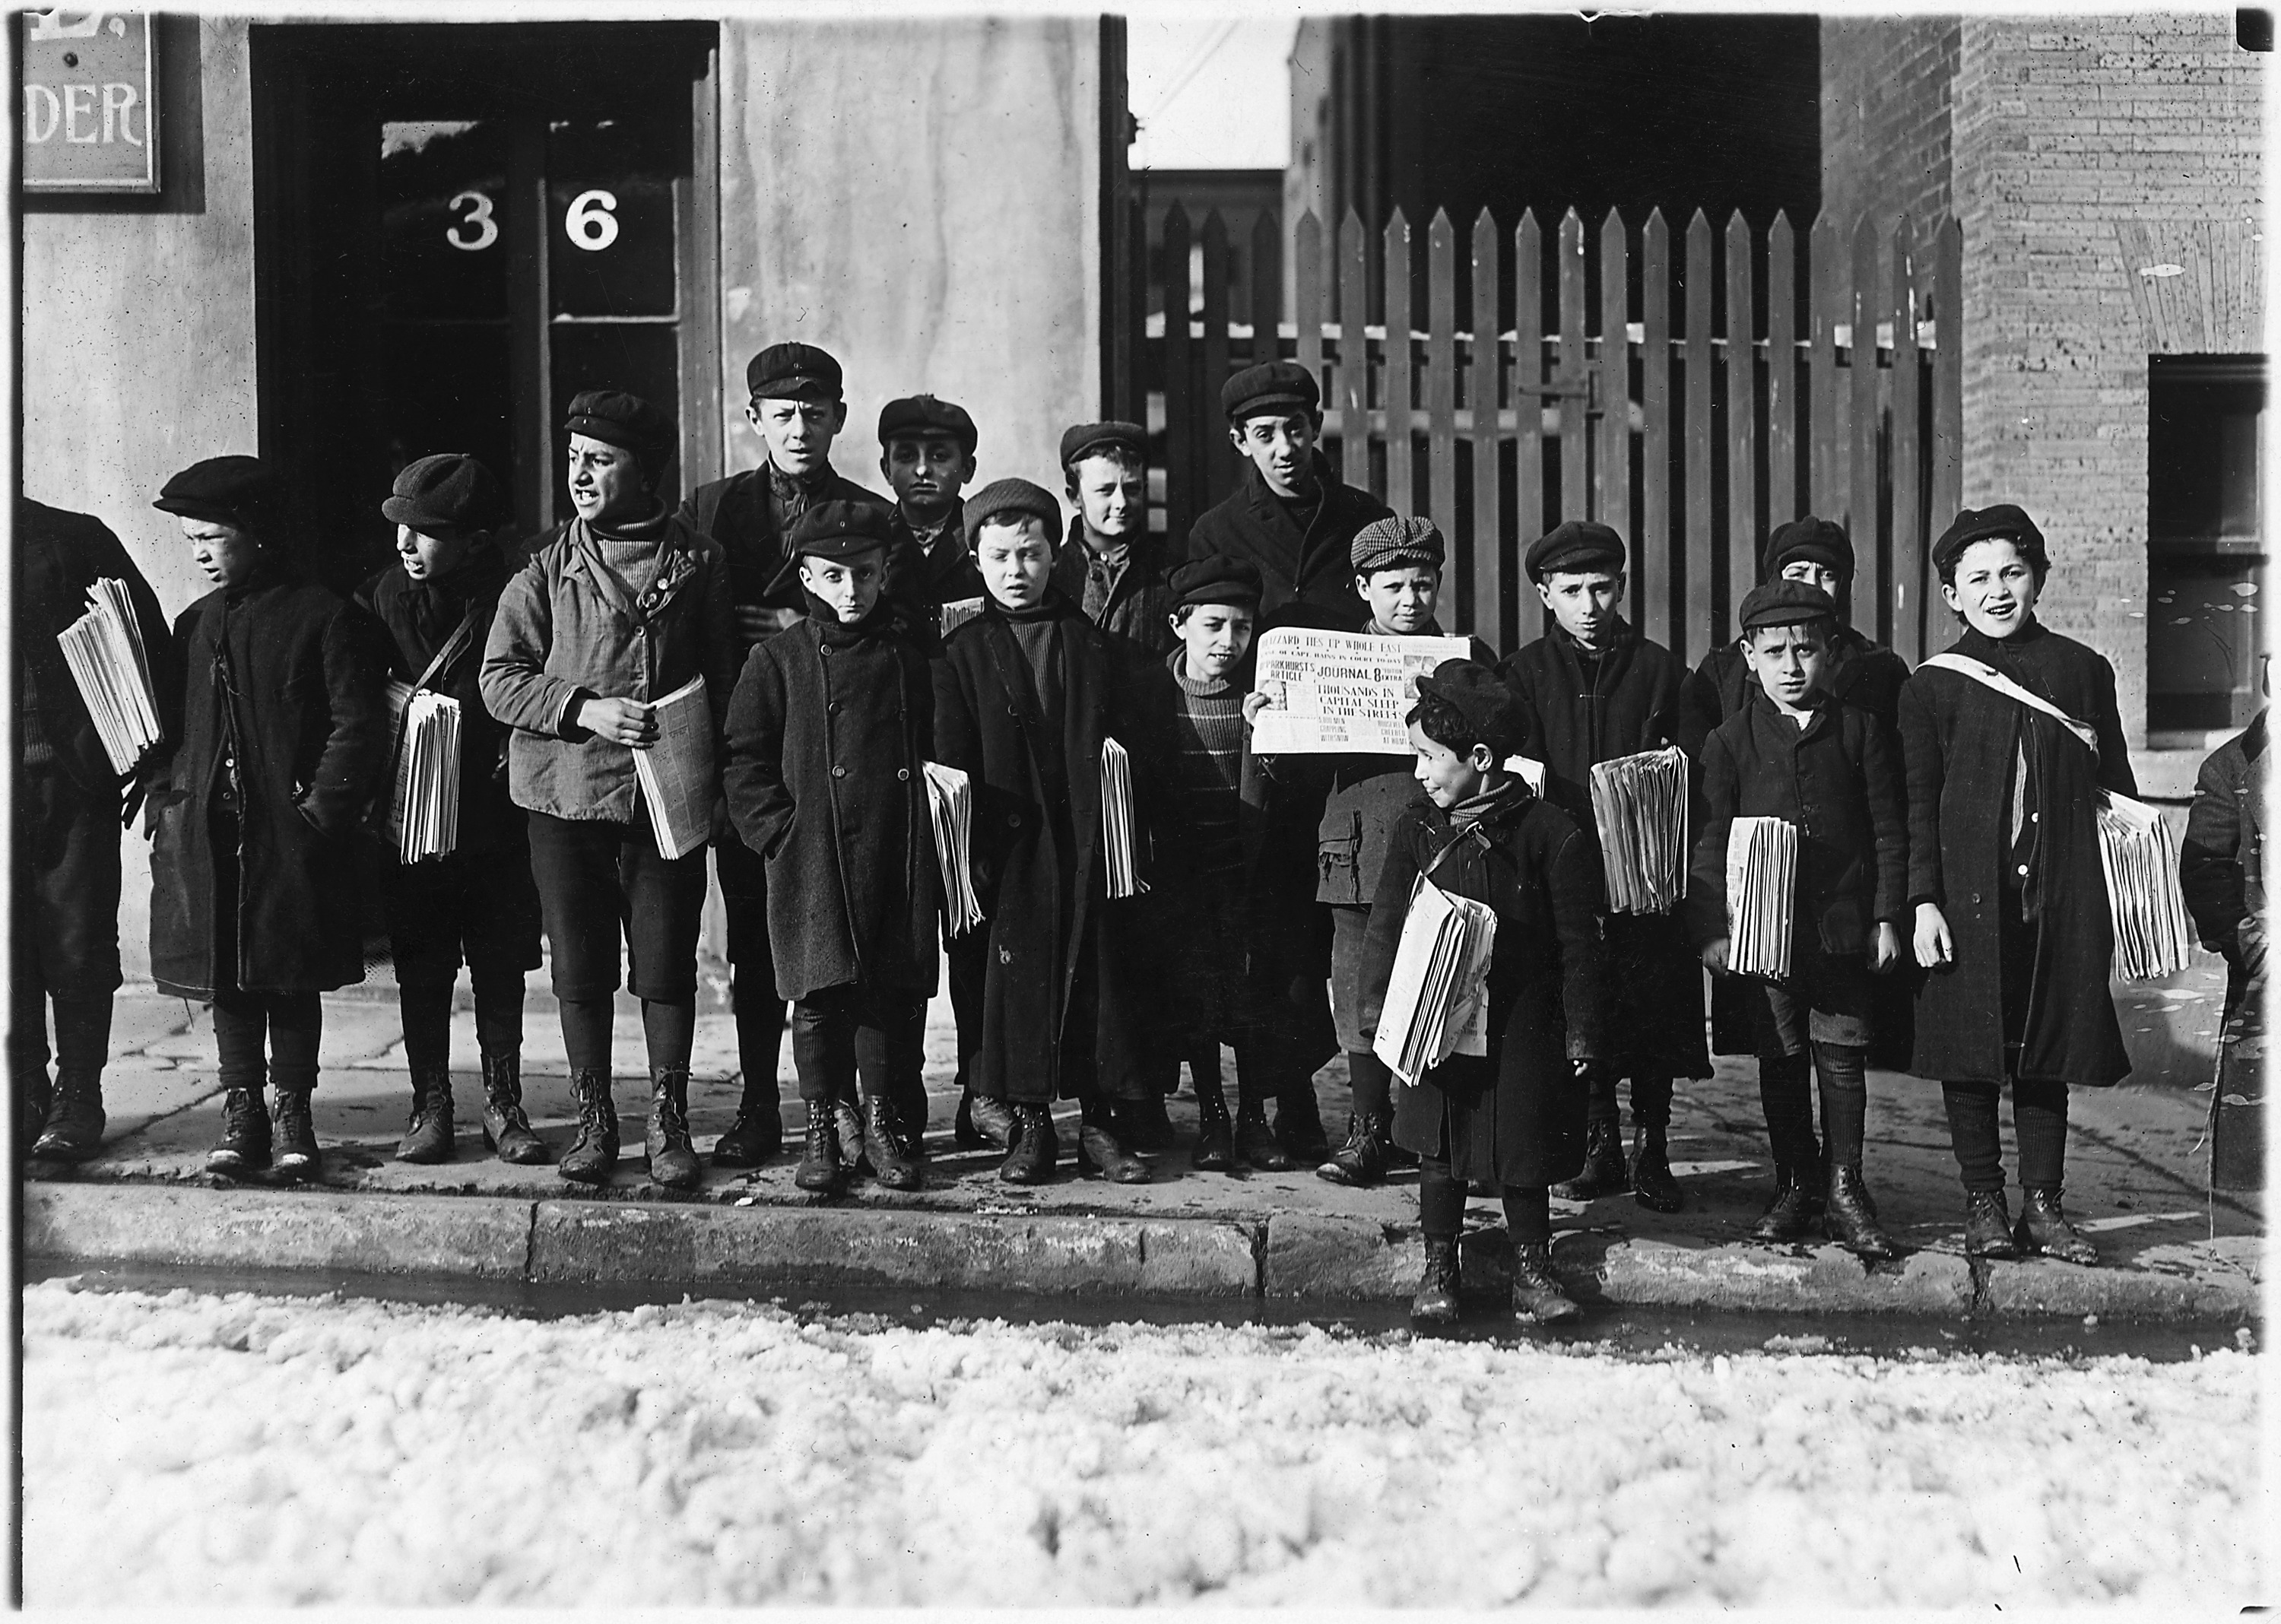 Waiting for their papers. 3 of these were 8 years old. Some were 9 years old. Hartford, Conn. - NARA - 523169